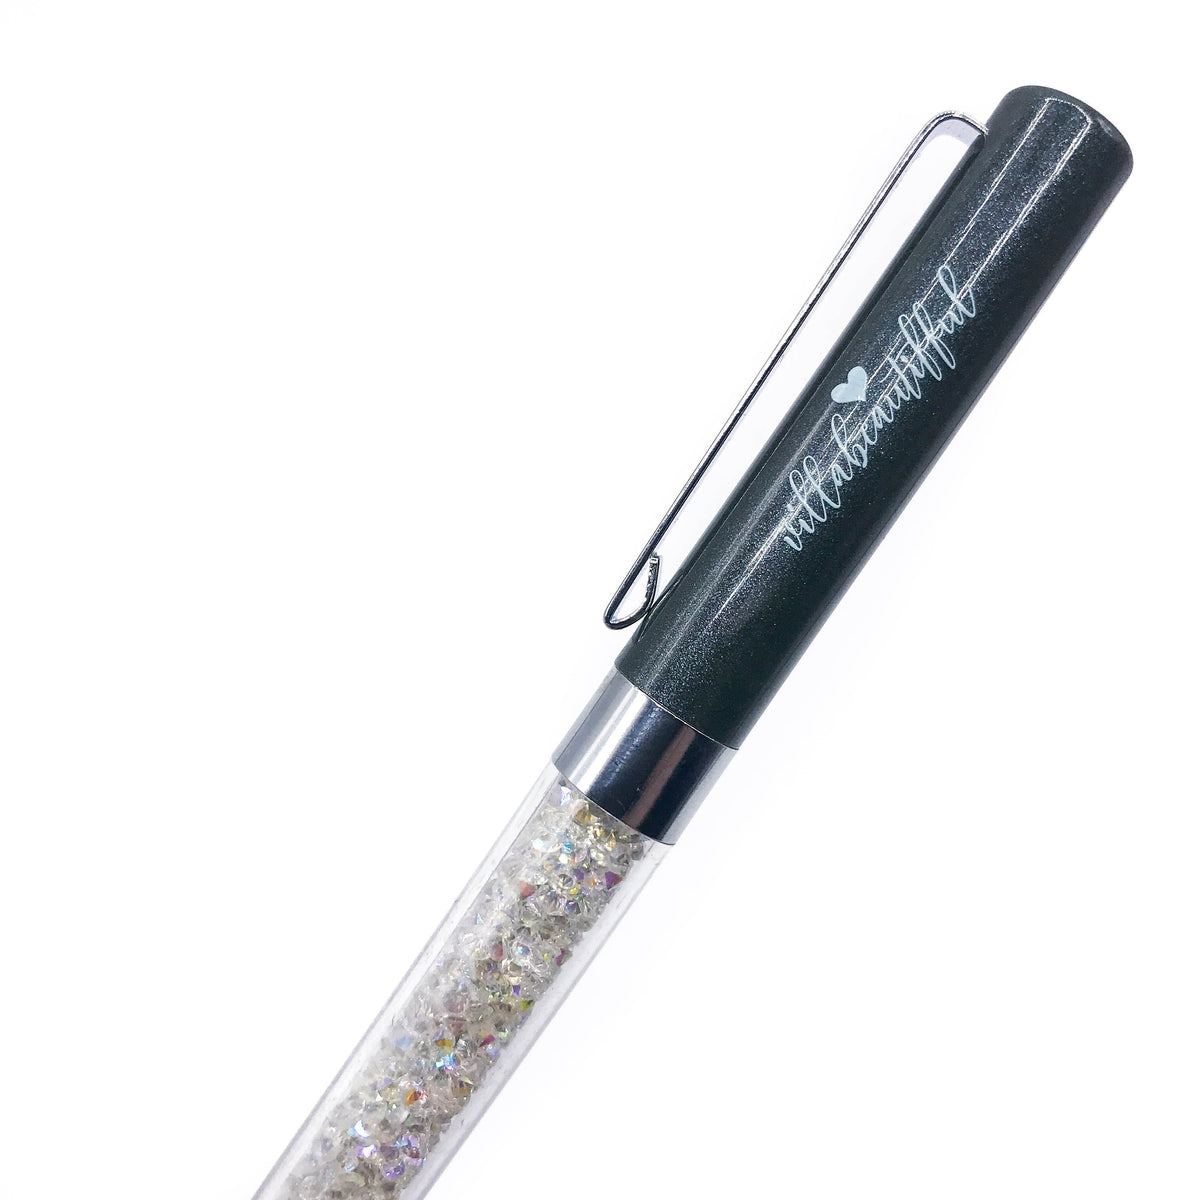 Mossy Rock Imperfect Crystal VBPen | limited pen